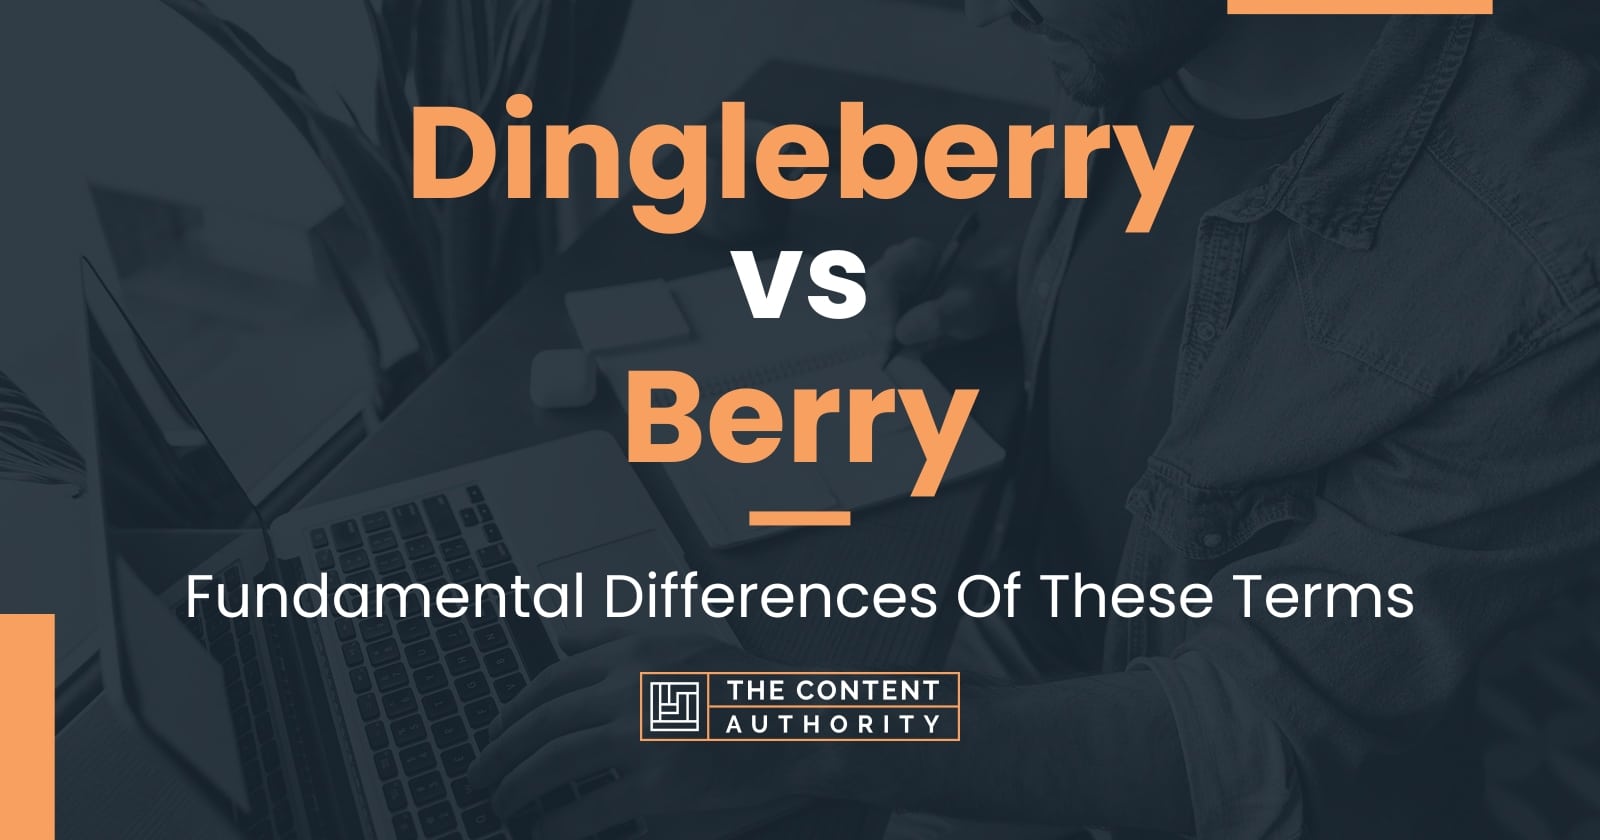 Why did they describe dingleberries in this detail #dingleberry #dingl, dingle berries